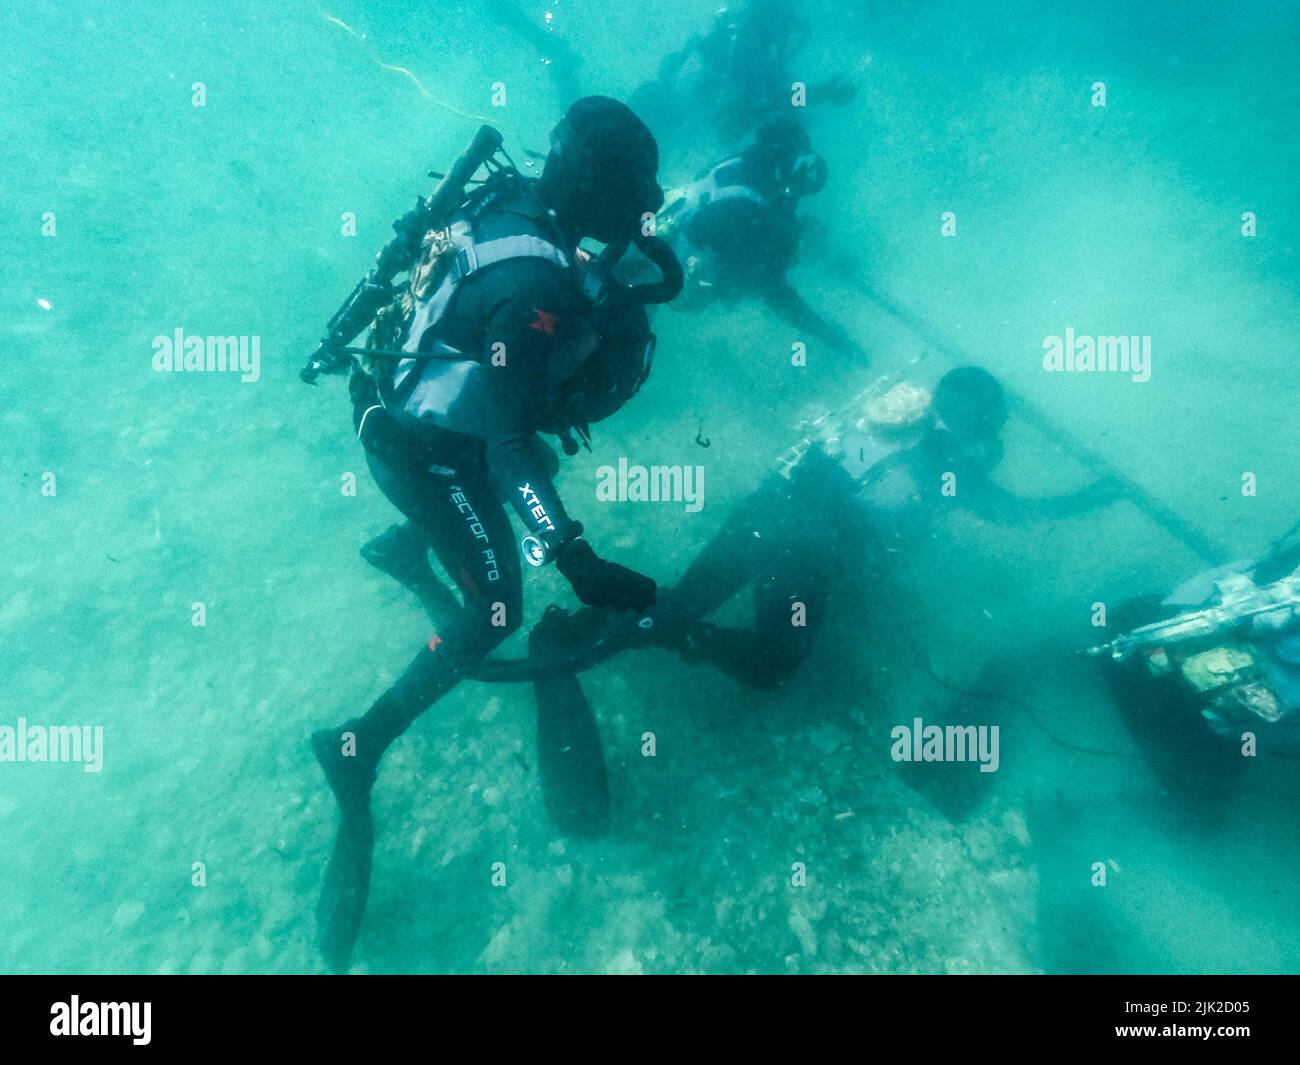 Members of U.S. Naval Special Warfare Task Unit Europe (NSWTU-E) conduct diving ops alongside the Croatian Zapovjedništvo Specialjalnih Snaga (ZSS) in Split, Croatia, April 15, 2022. For the Croatian ZSS, Joint Combined Exchange Training, or JCET with partner nations is not uncommon. The ZSS  were founded in 2000 as the Special Operations Battalion and since then, its operators have participated in multiple operations, including stints in Afghanistan as part of NATO’s International Security Assistance Force (ISAF). (U.S. Army photo by Sgt. Patrik Orcutt) Stock Photo